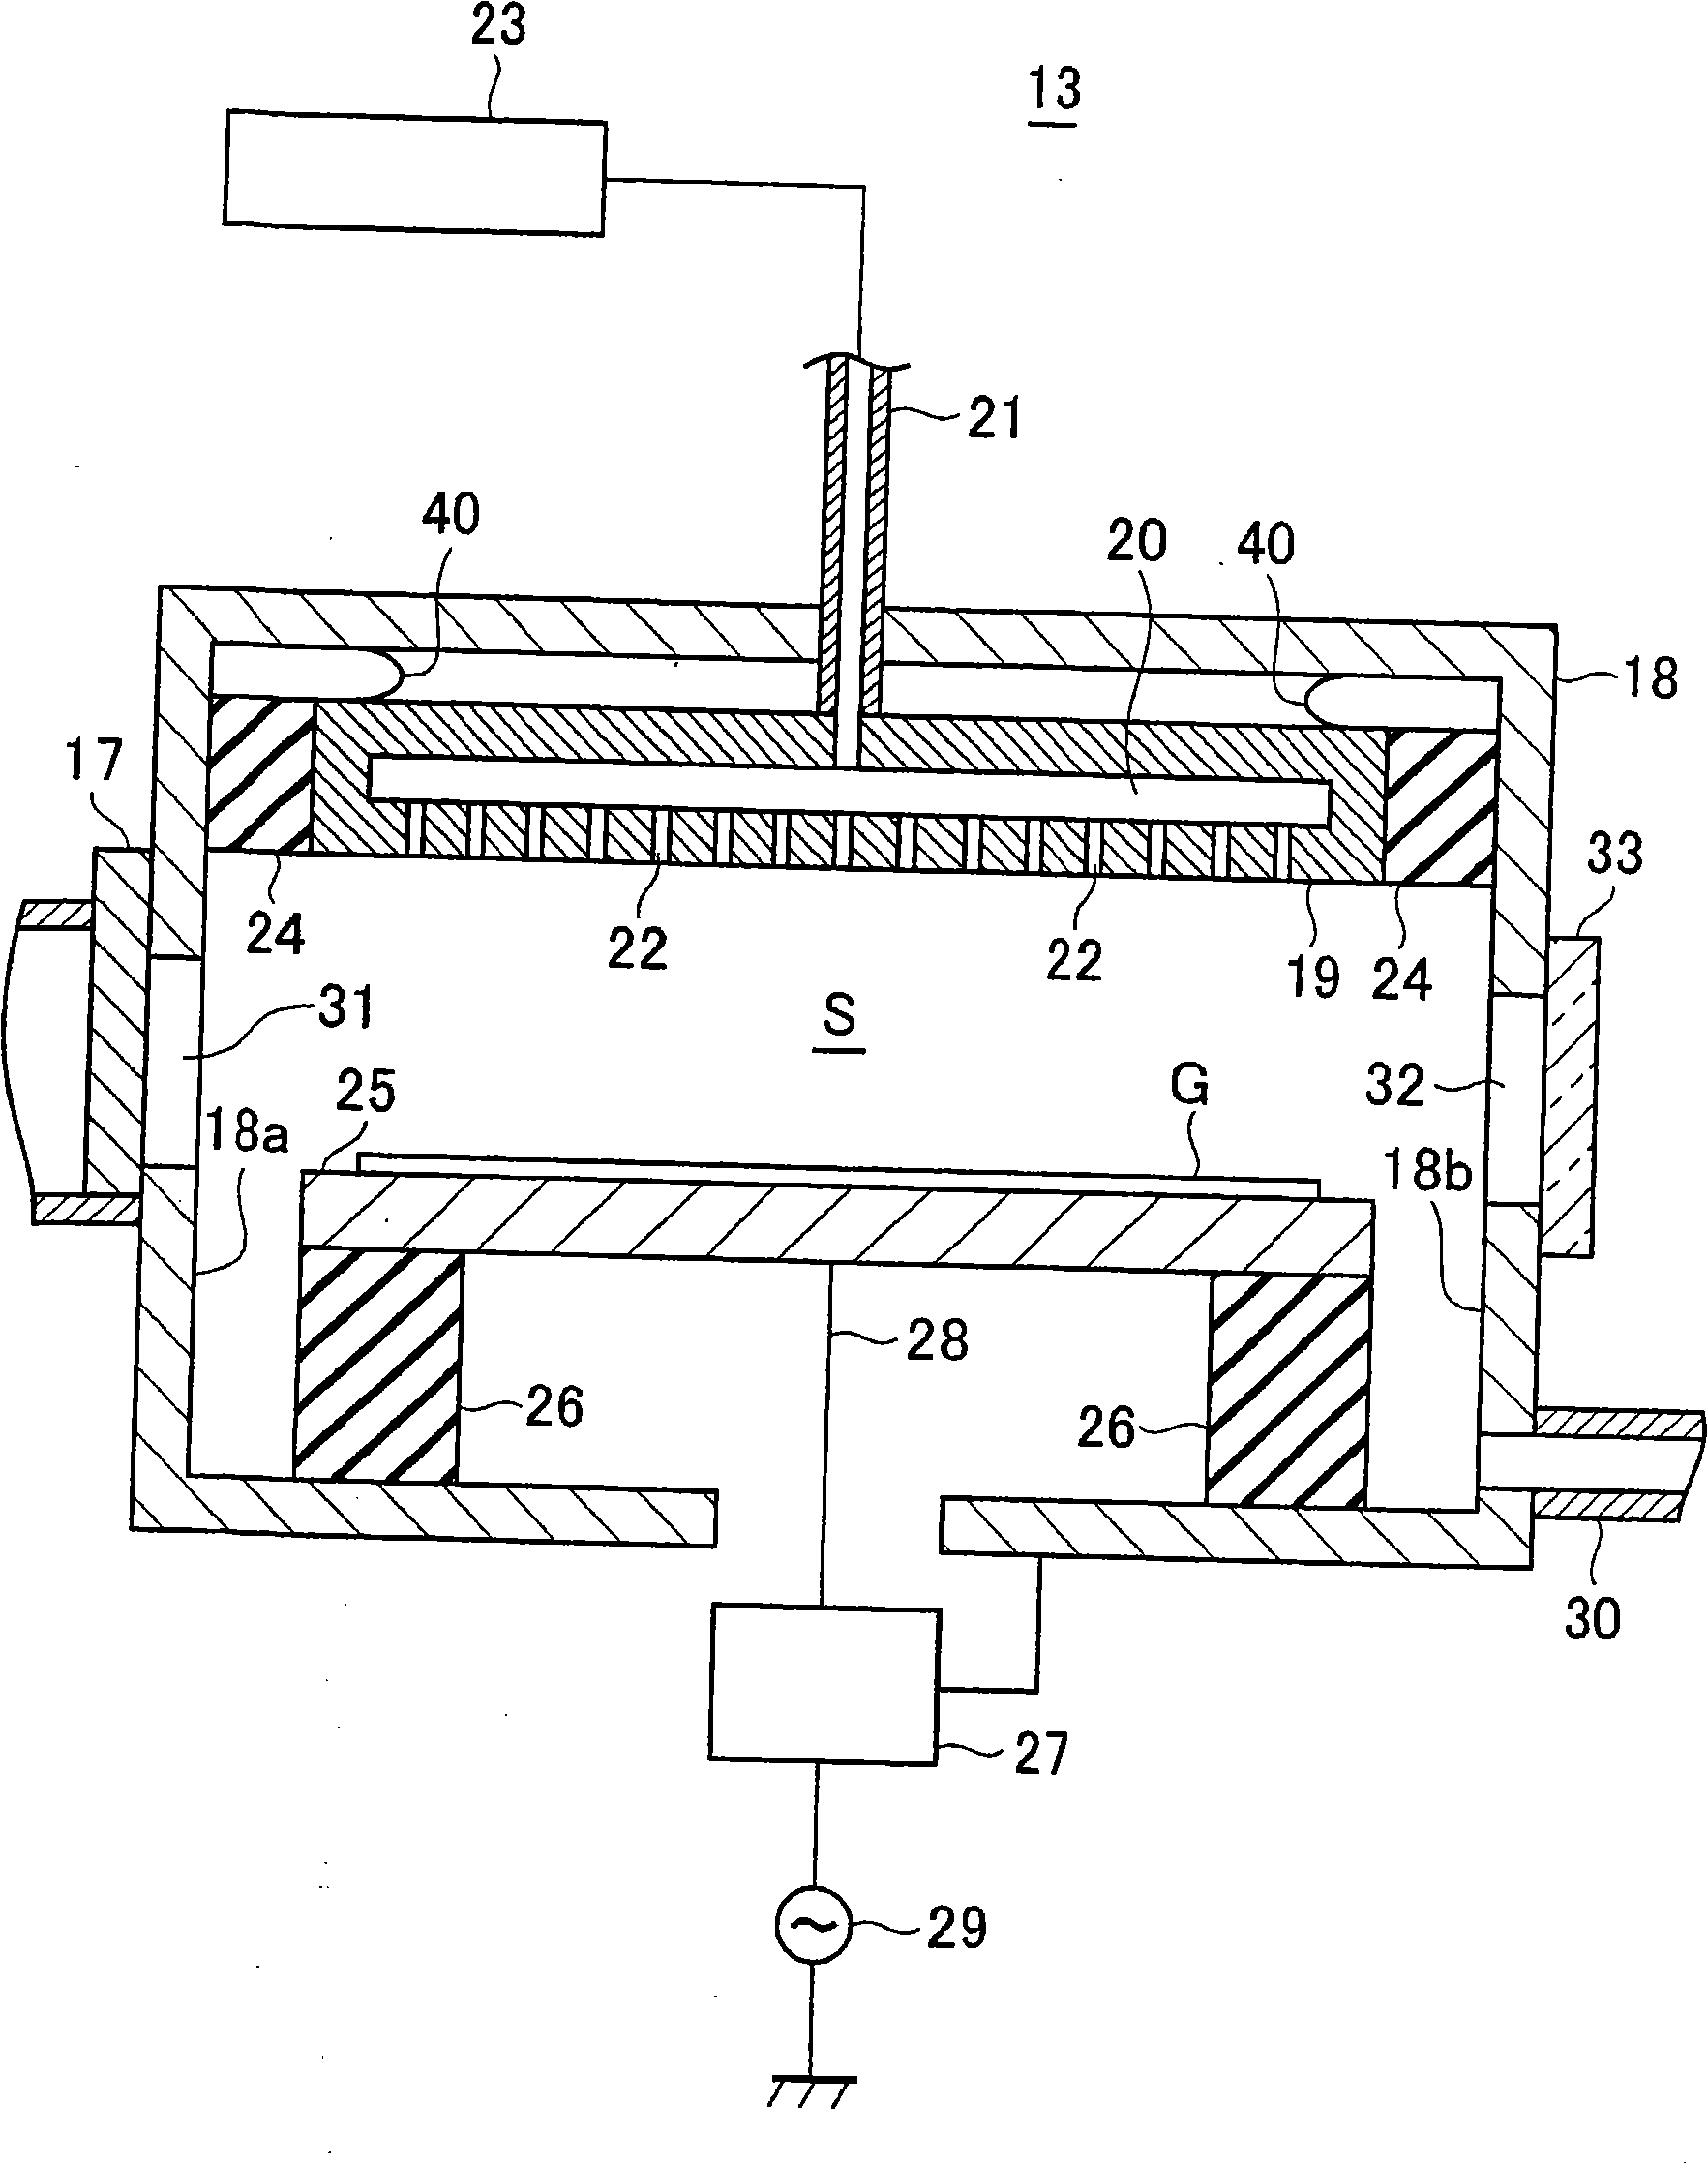 Substrate processing sytstem and apparatus